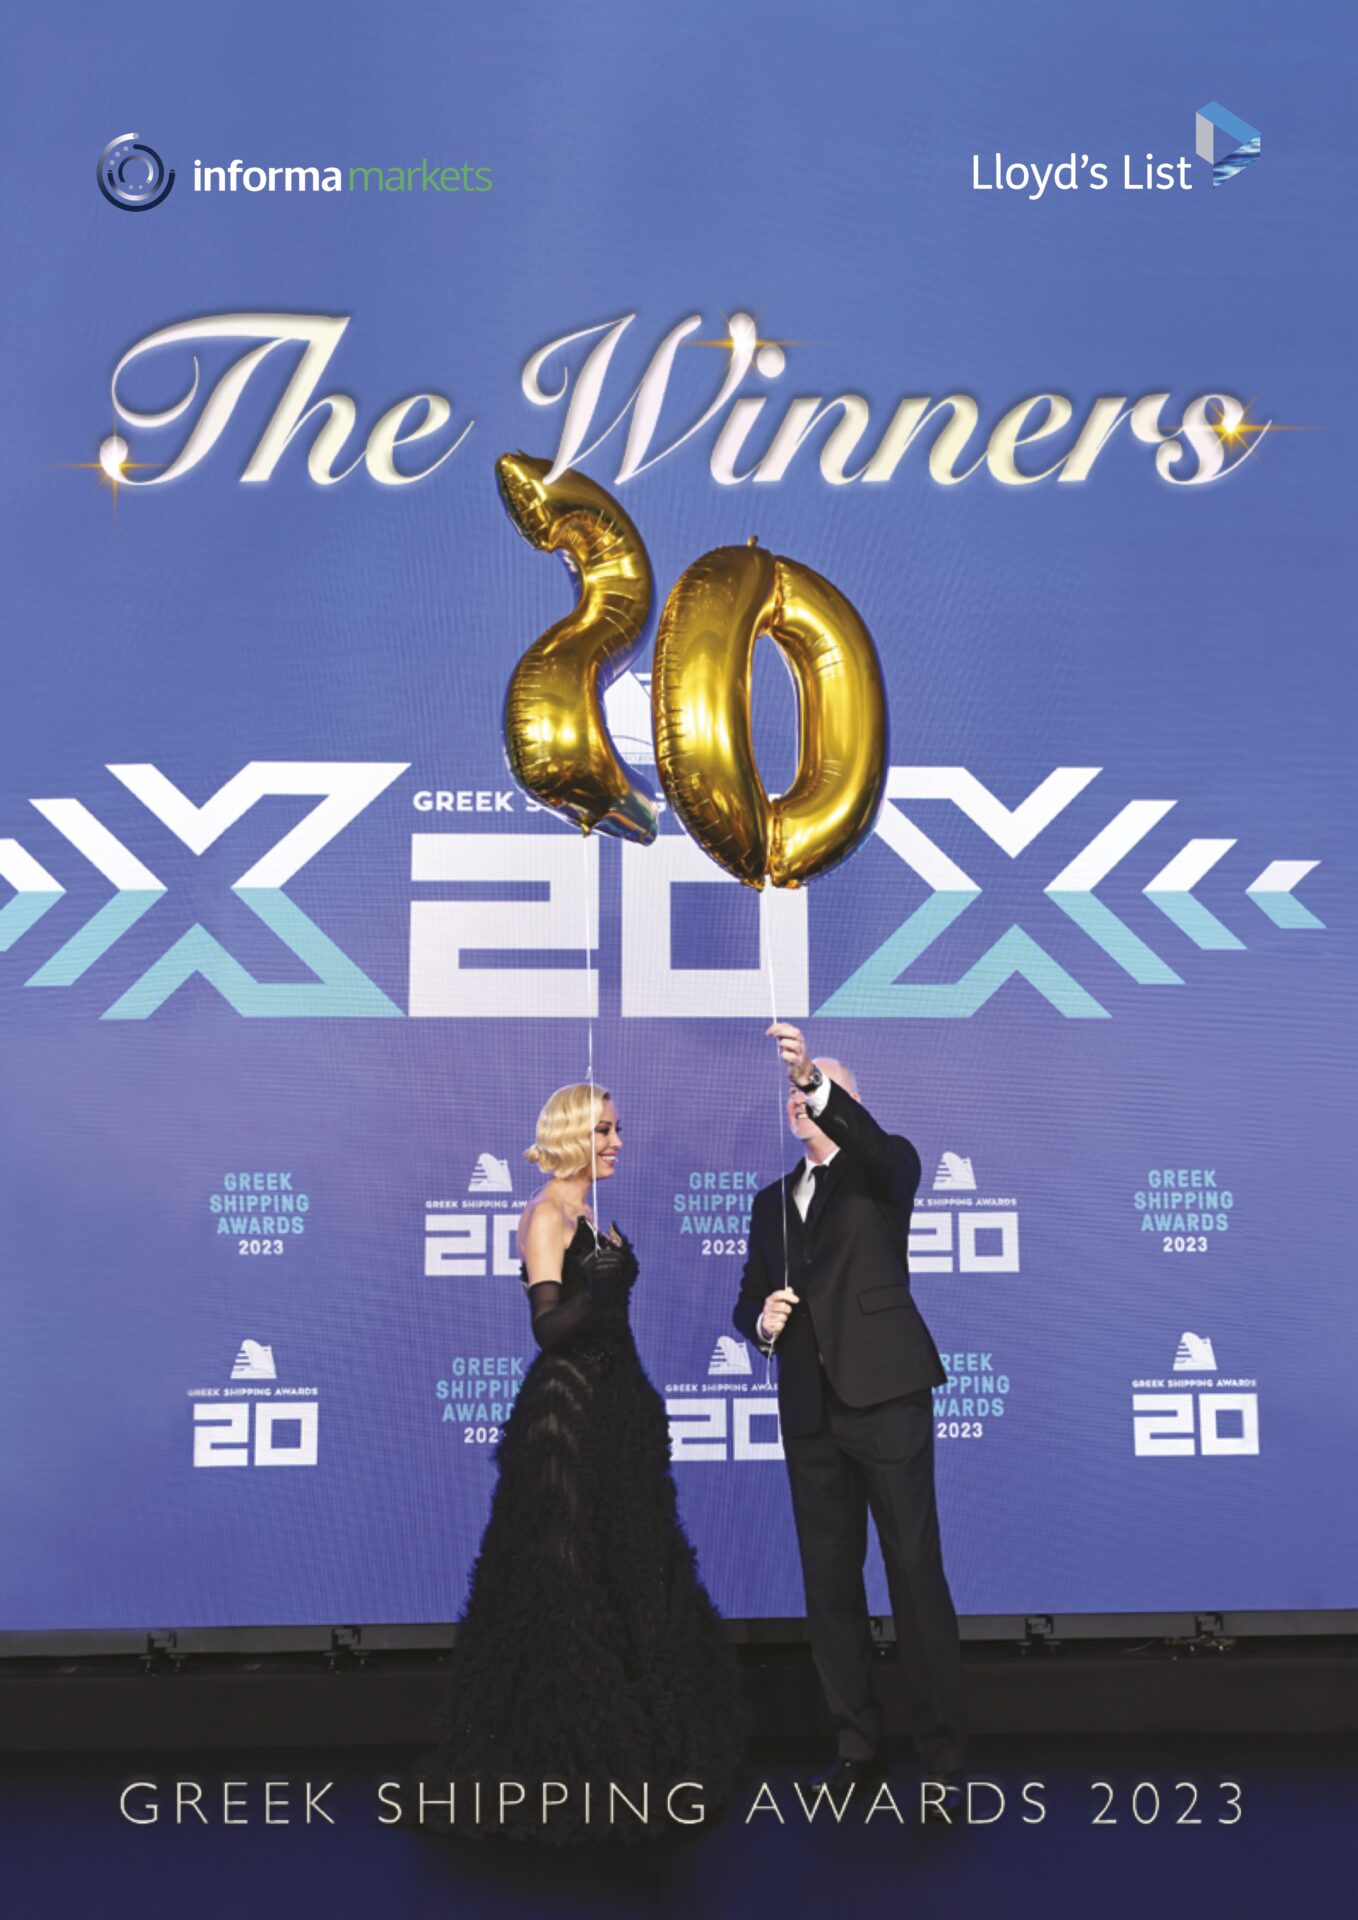 The frontpage of the 2023 Greek Shipping Awards magazine, featuring co-hosts Andriana Paraskevopoulou and Nigel Lowry holding two balloons forming the number 20, to celebrate the event's 20th anniversary.